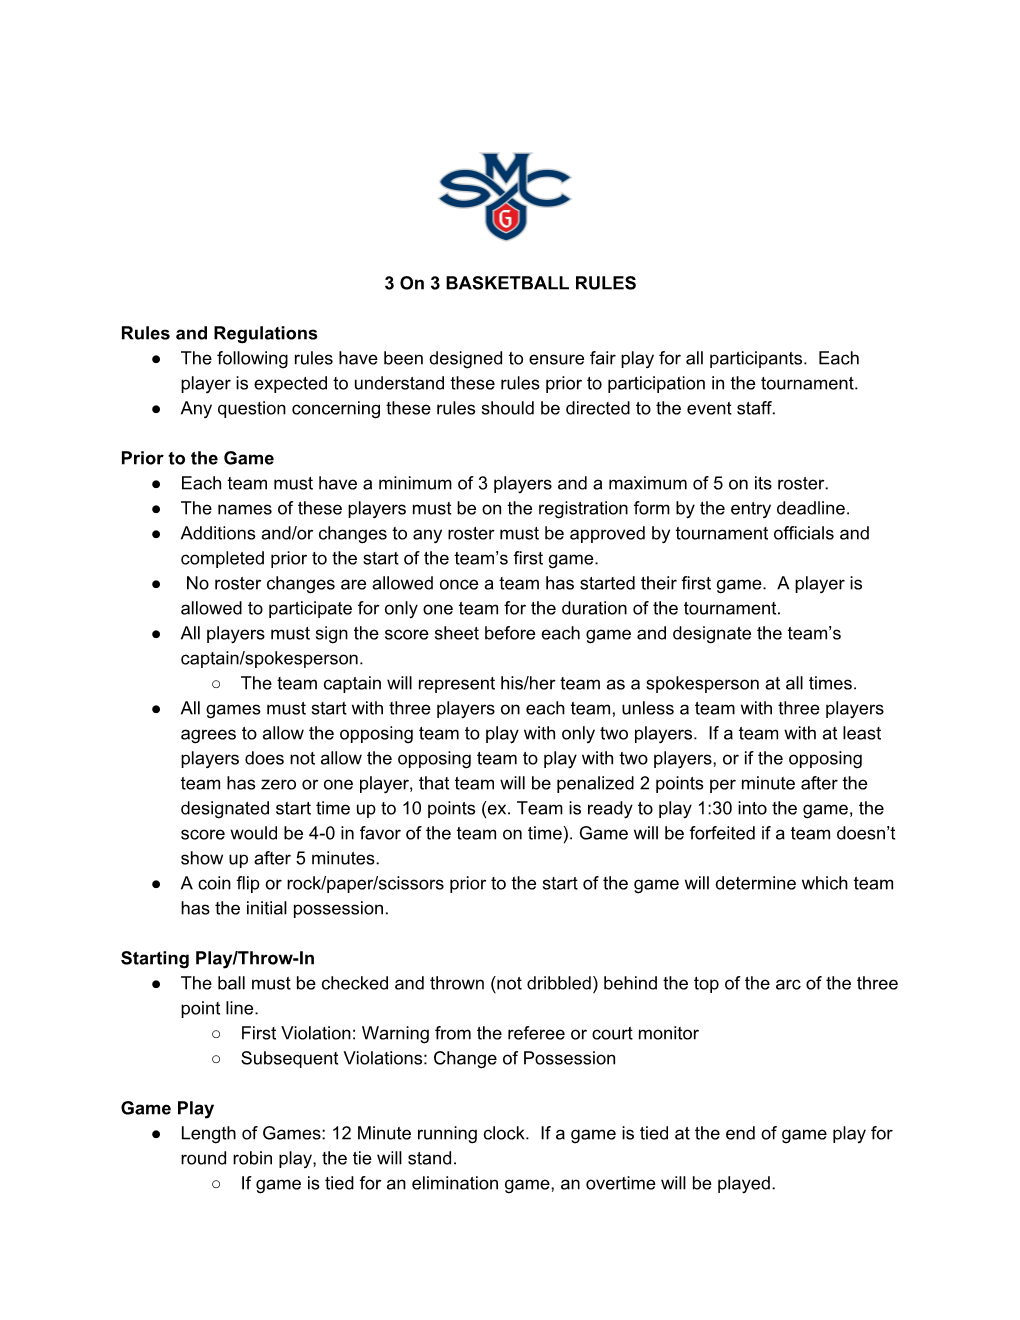 3 on 3 BASKETBALL RULES Rules and Regulations the Following